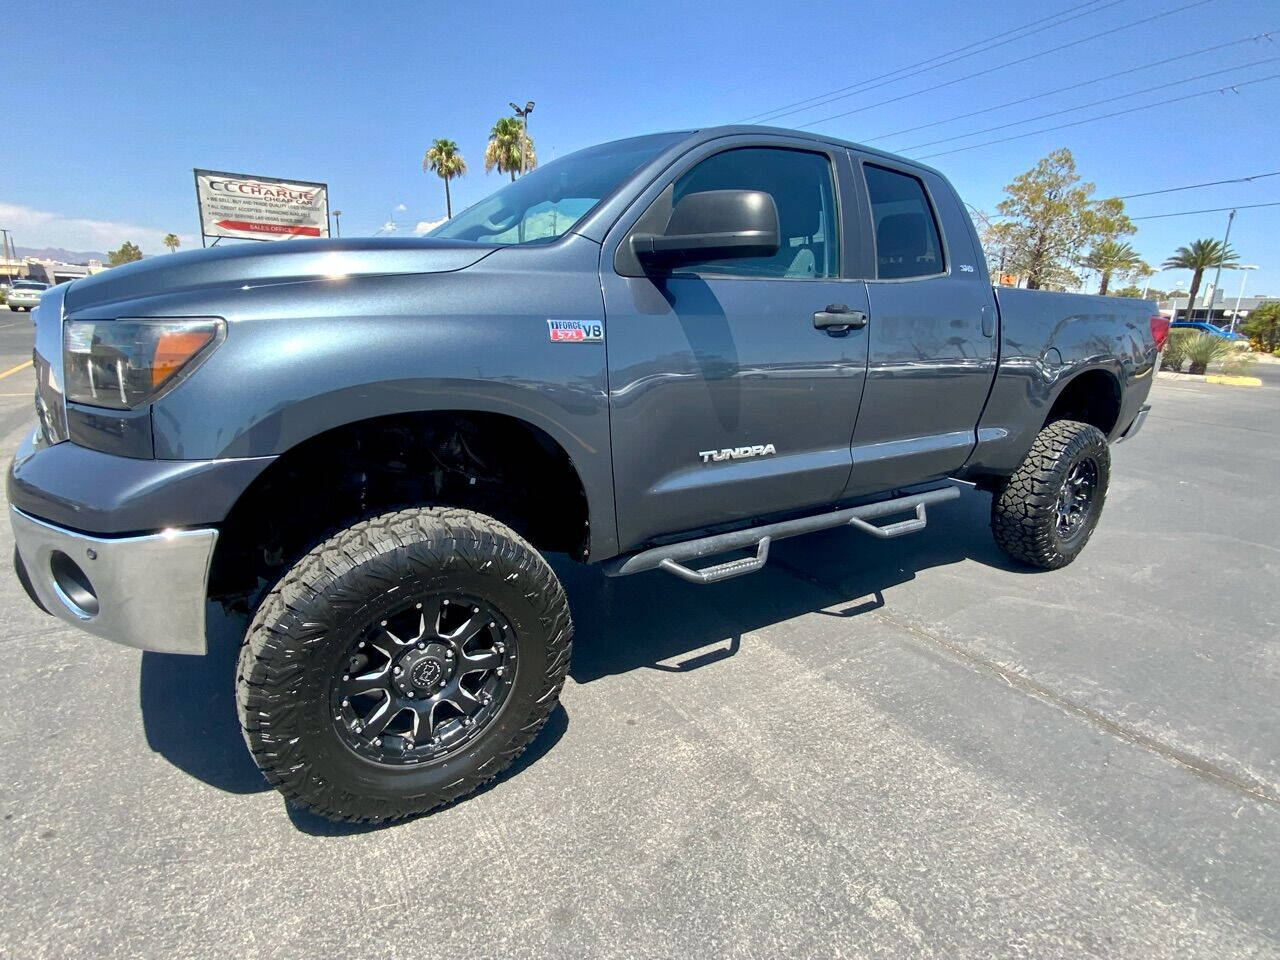 2010 Toyota Tundra For Sale In Las Vegas, NV - Carsforsale.com®